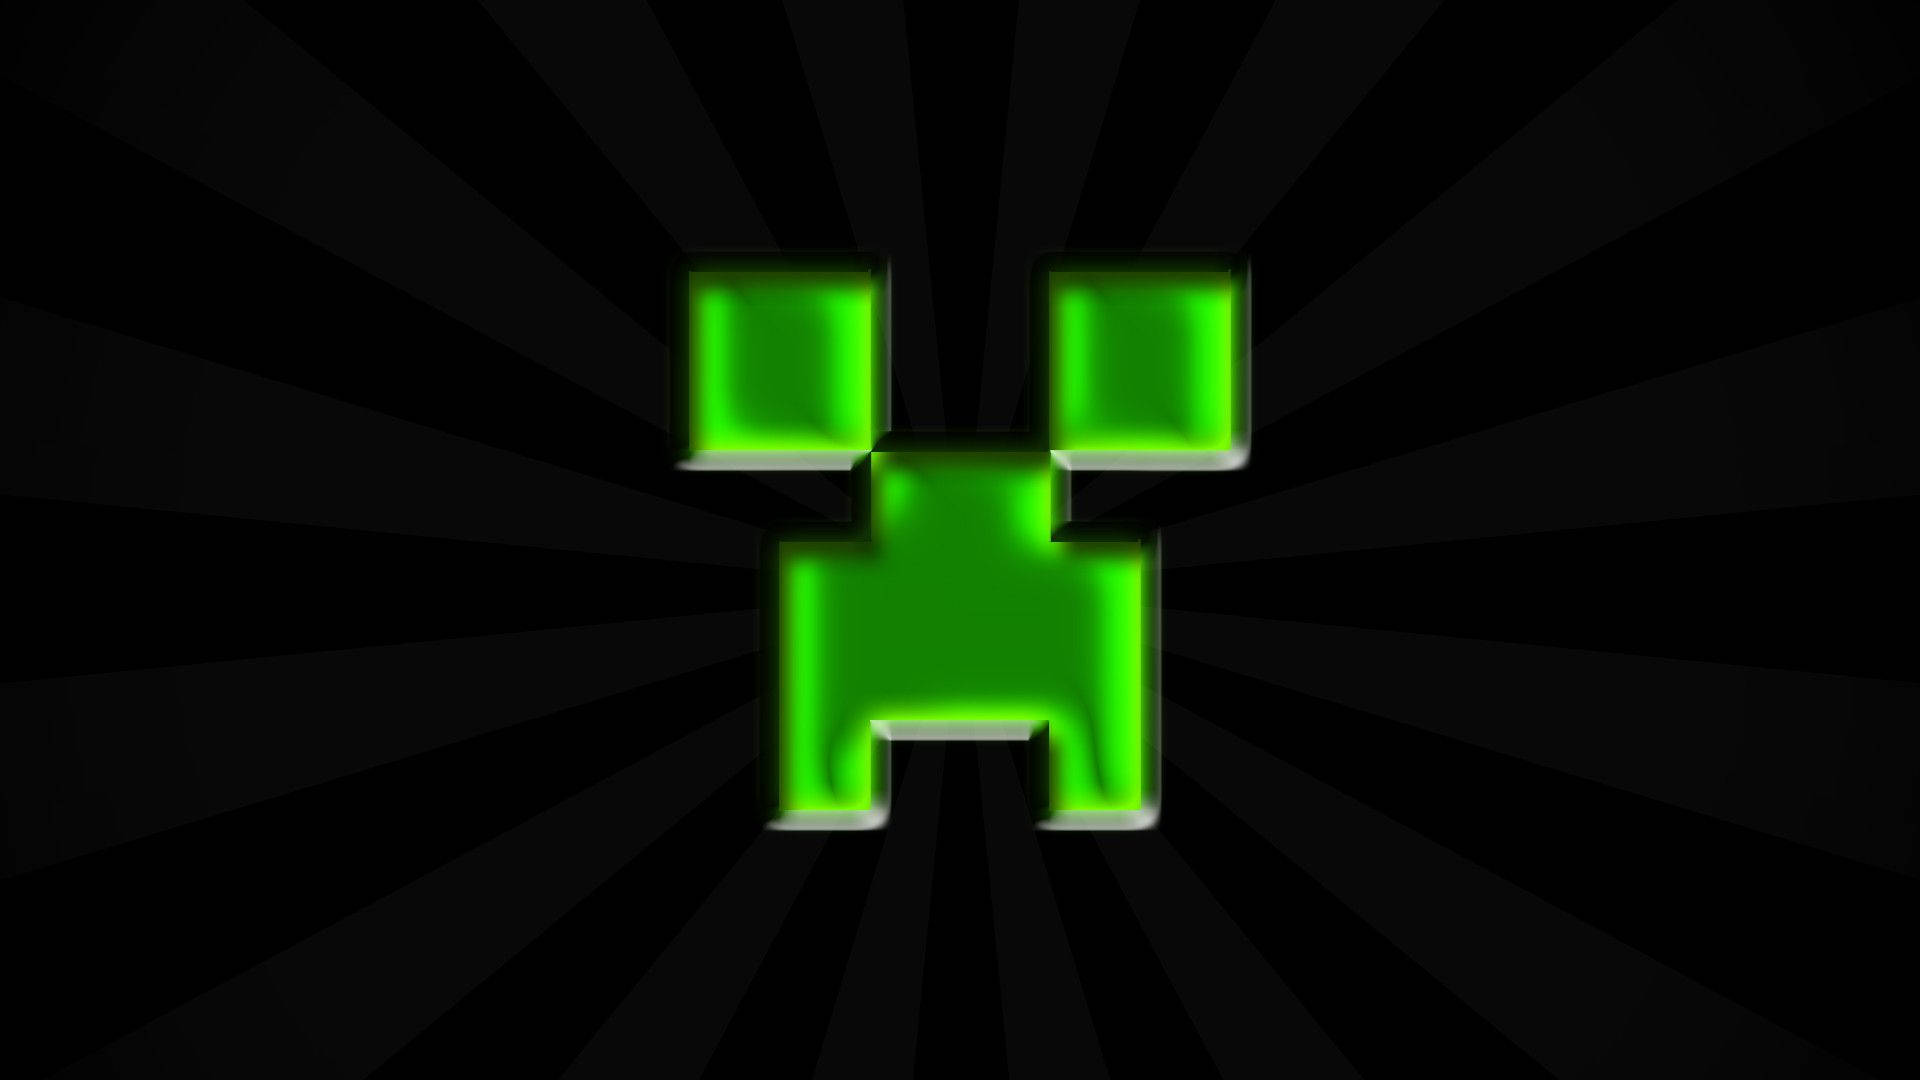 Minecraft Creeper Face Poster